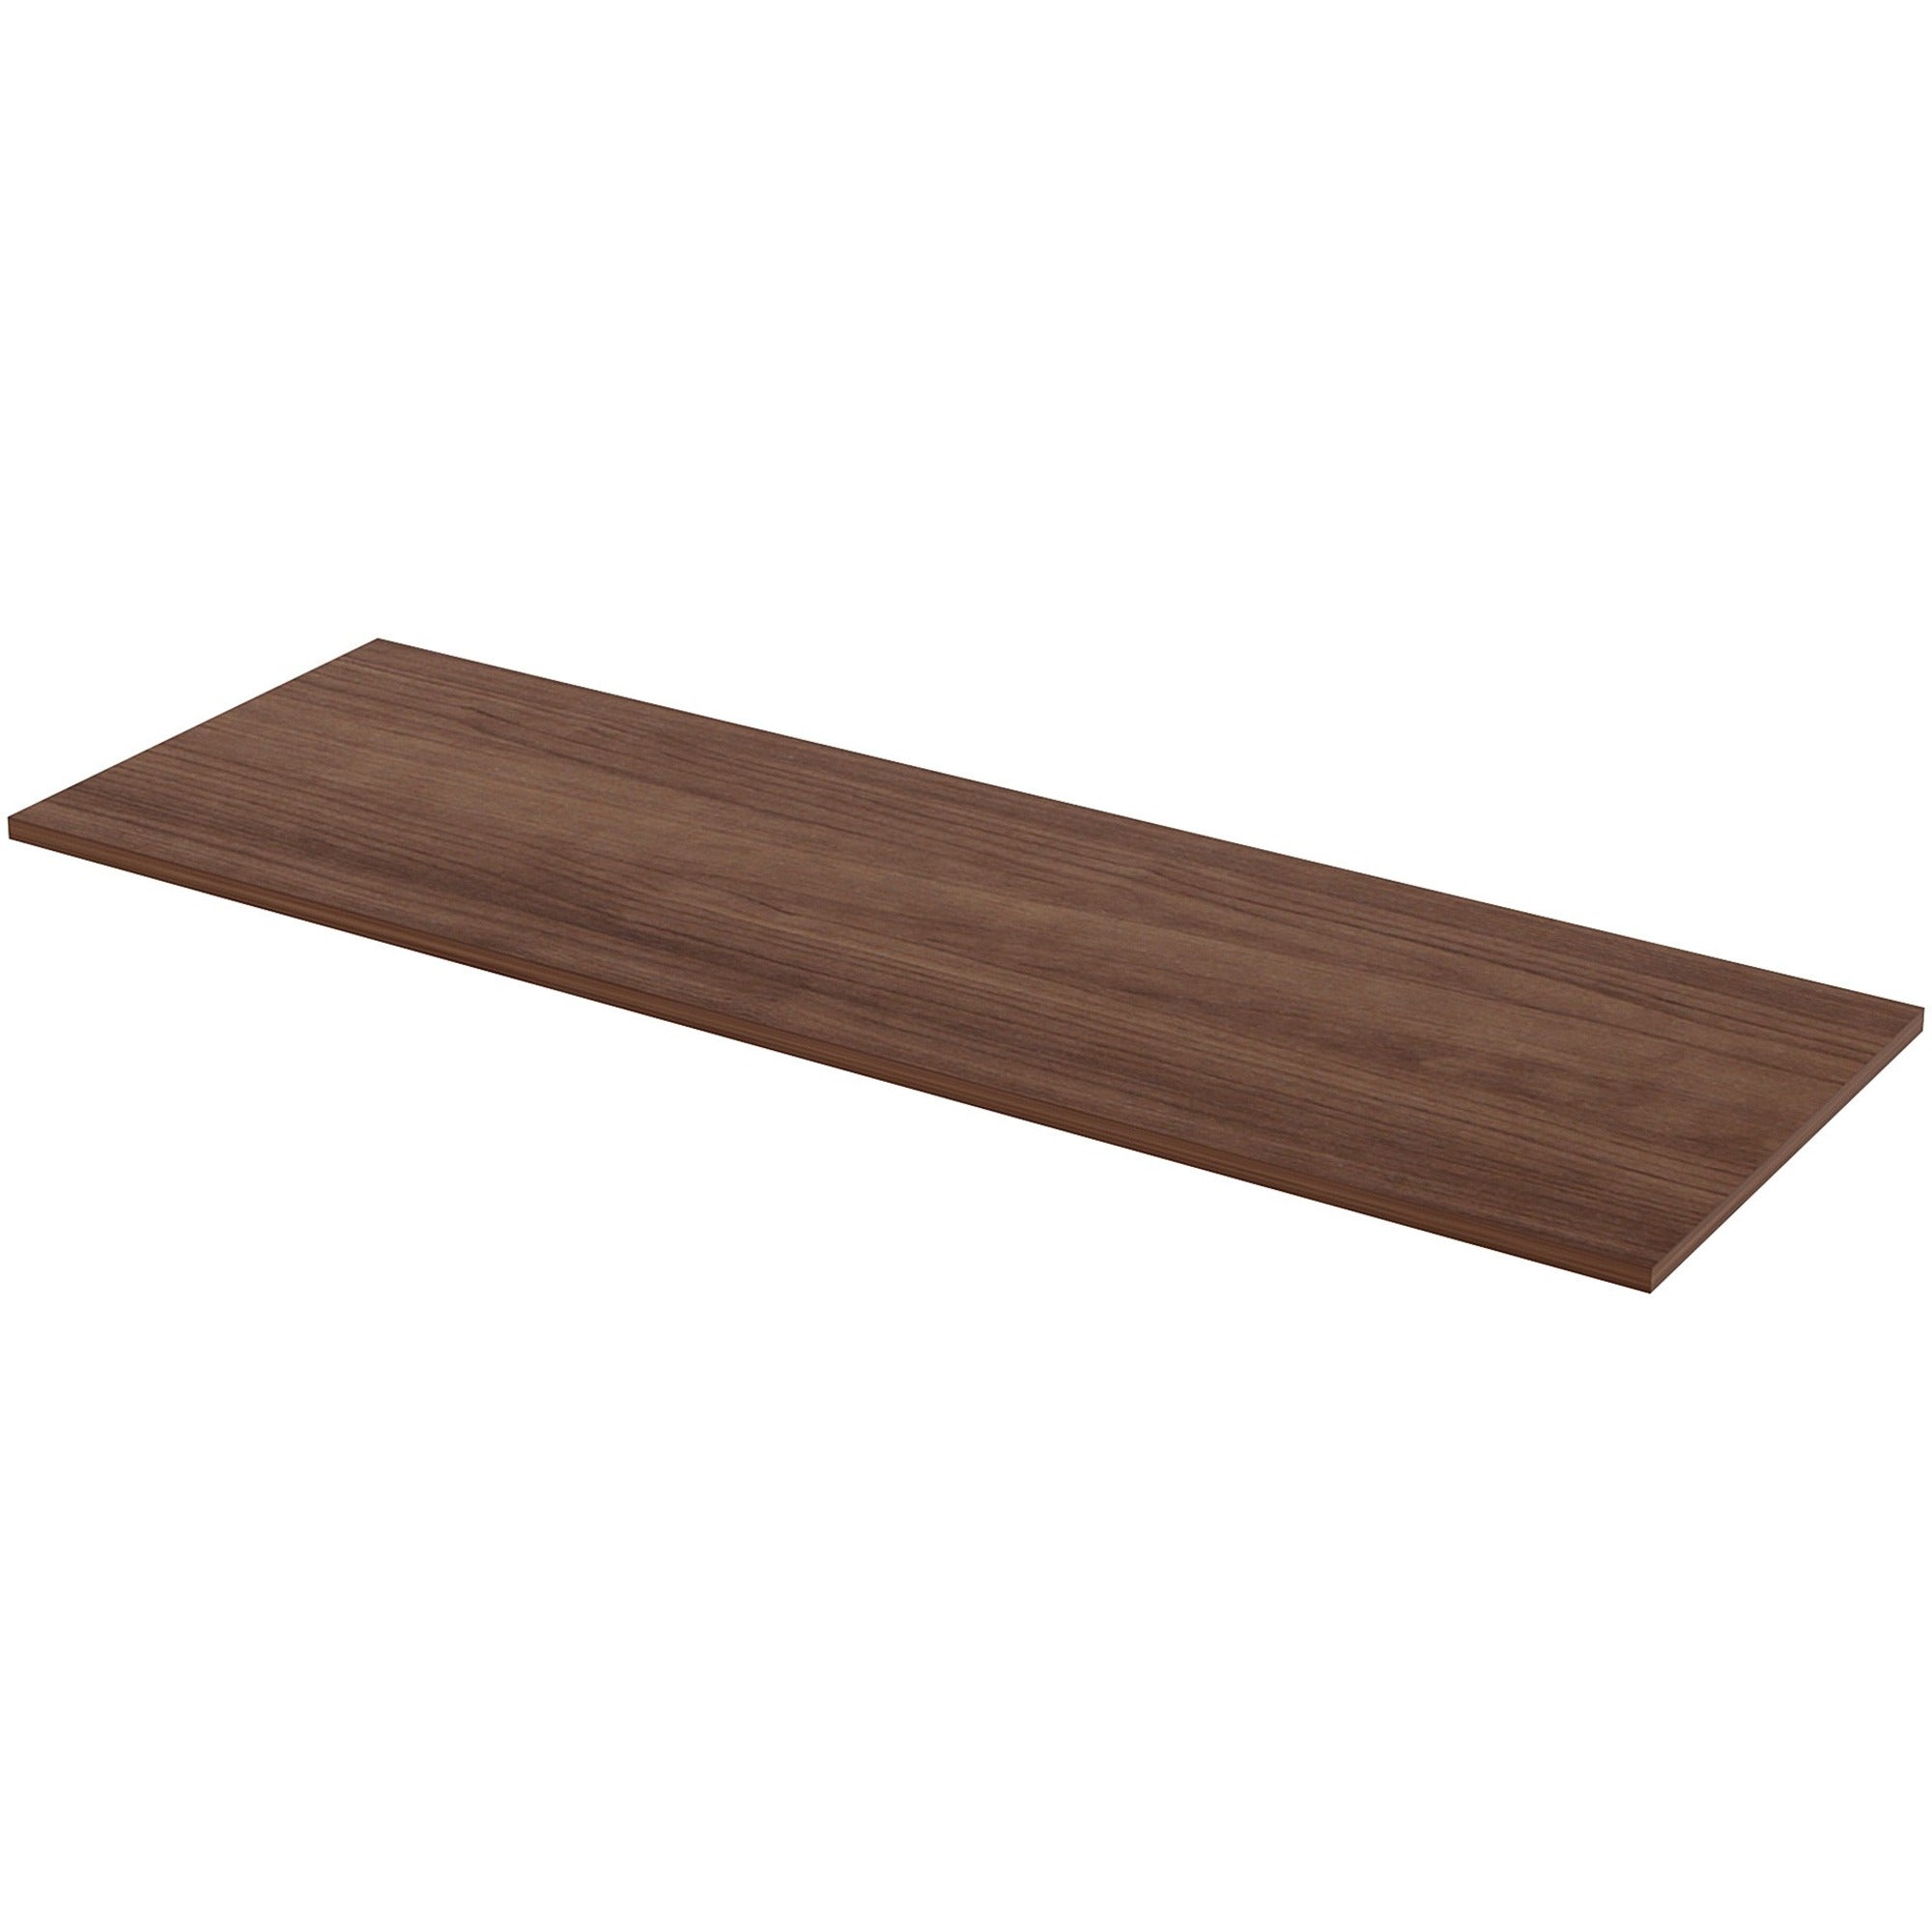 lorell-relevance-series-tabletop-for-table-topwalnut-rectangle-laminated-top-adjustable-height-x-24-table-top-width-x-72-table-top-depth-x-1-table-top-thickness-assembly-required-1-each_llr59632 - 1